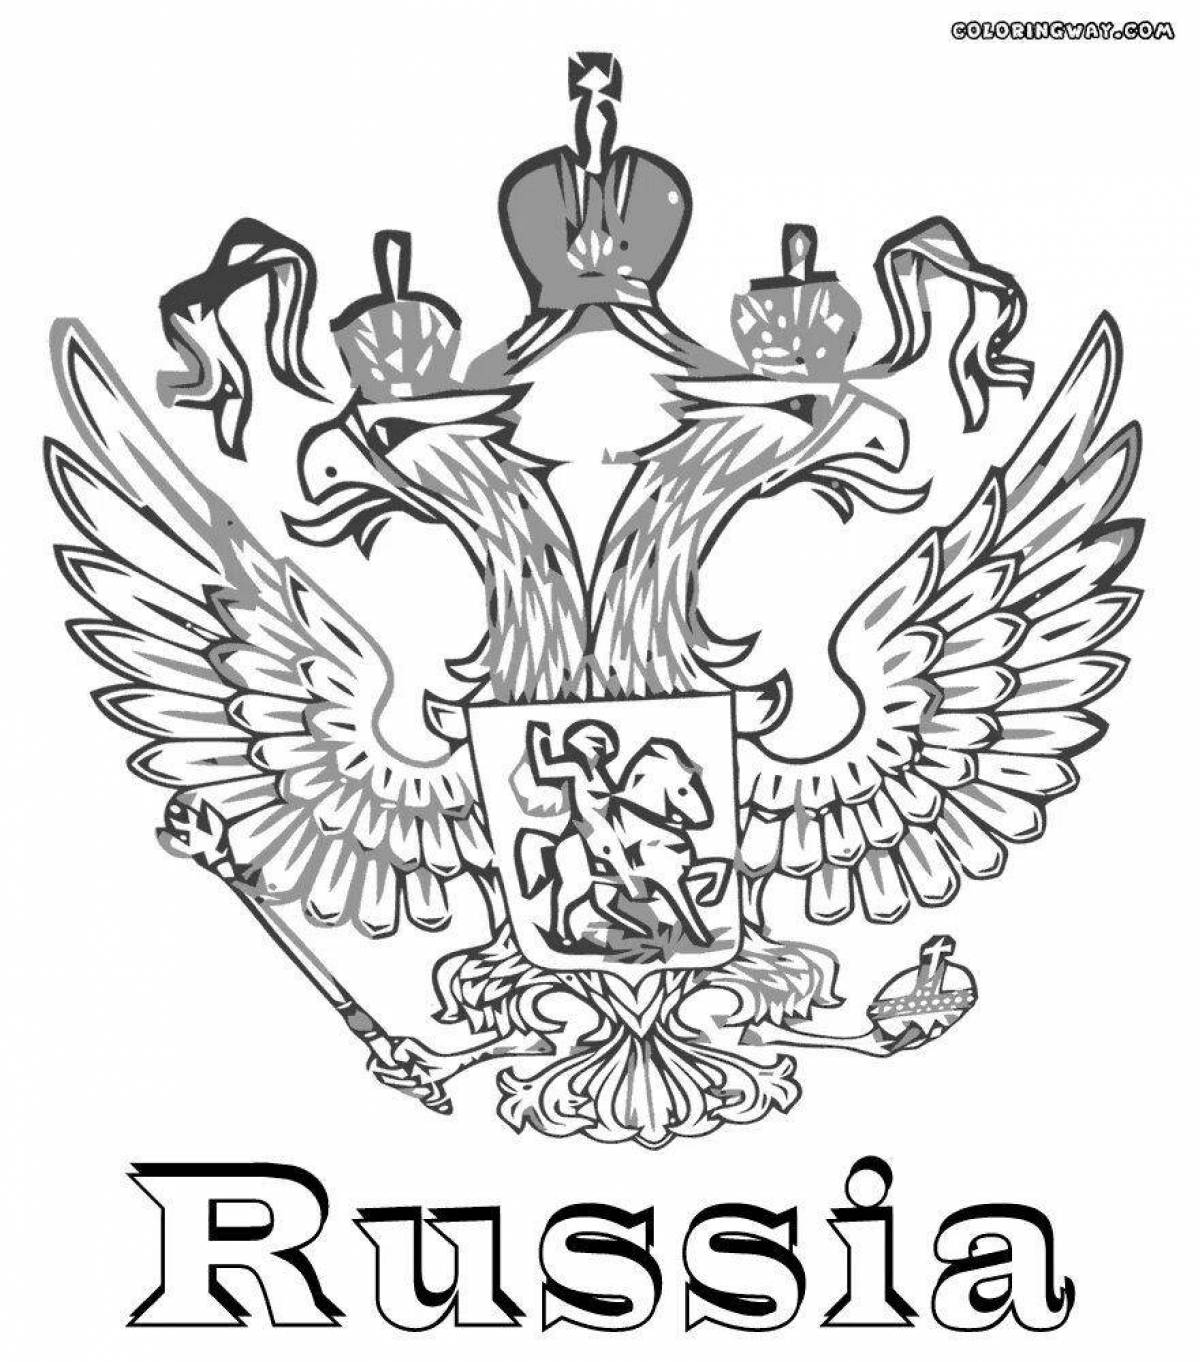 Coat of arms of the Russian Federation #1